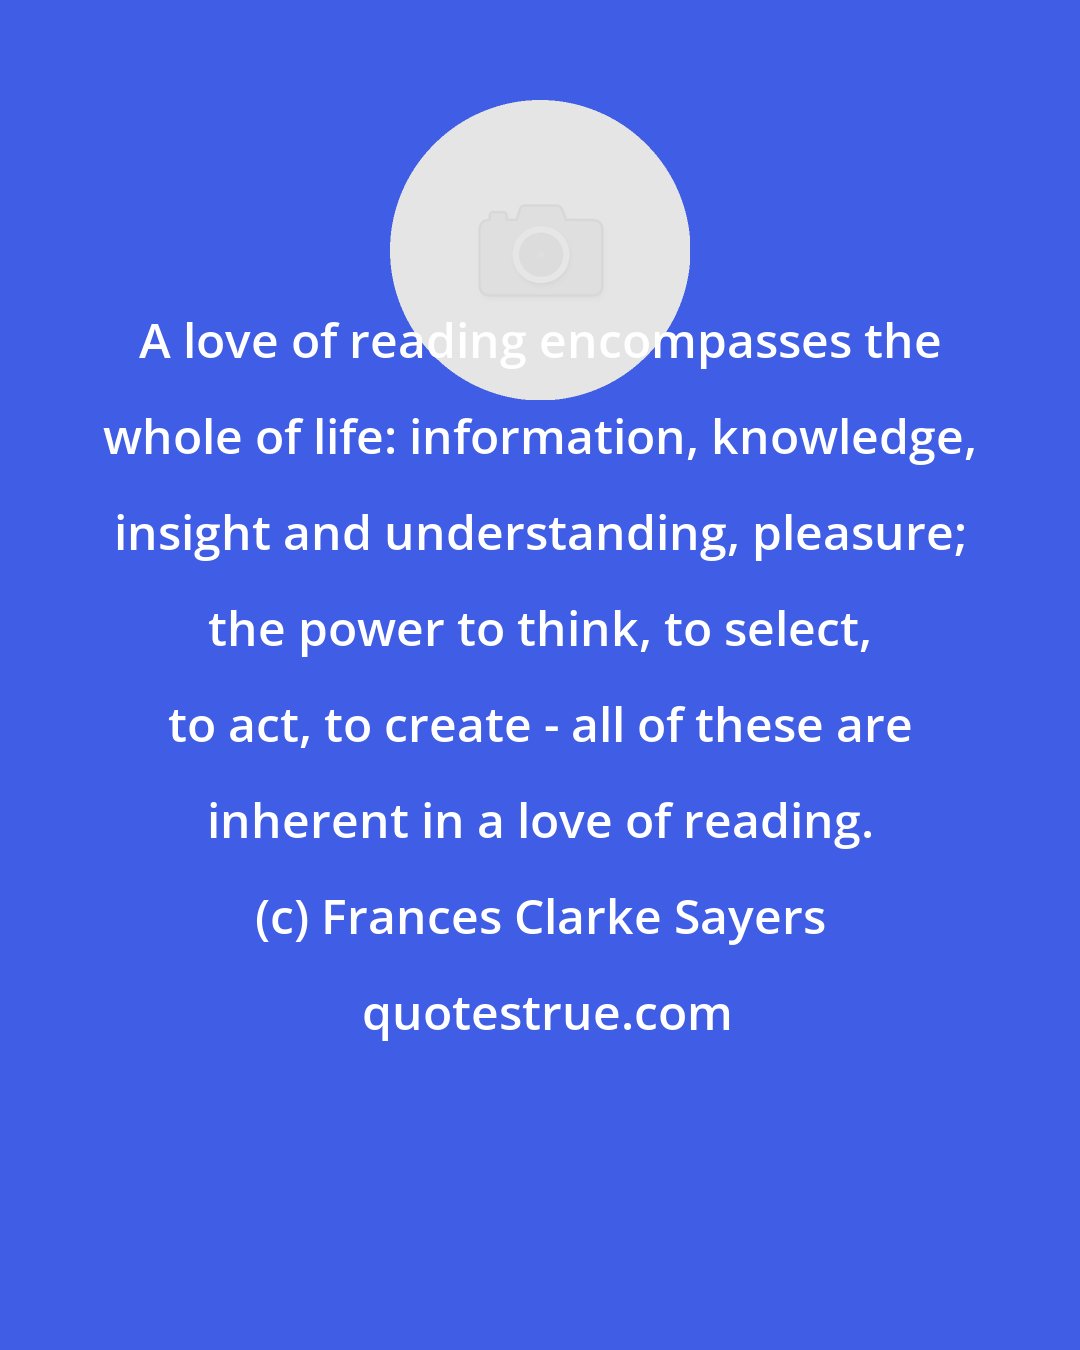 Frances Clarke Sayers: A love of reading encompasses the whole of life: information, knowledge, insight and understanding, pleasure; the power to think, to select, to act, to create - all of these are inherent in a love of reading.